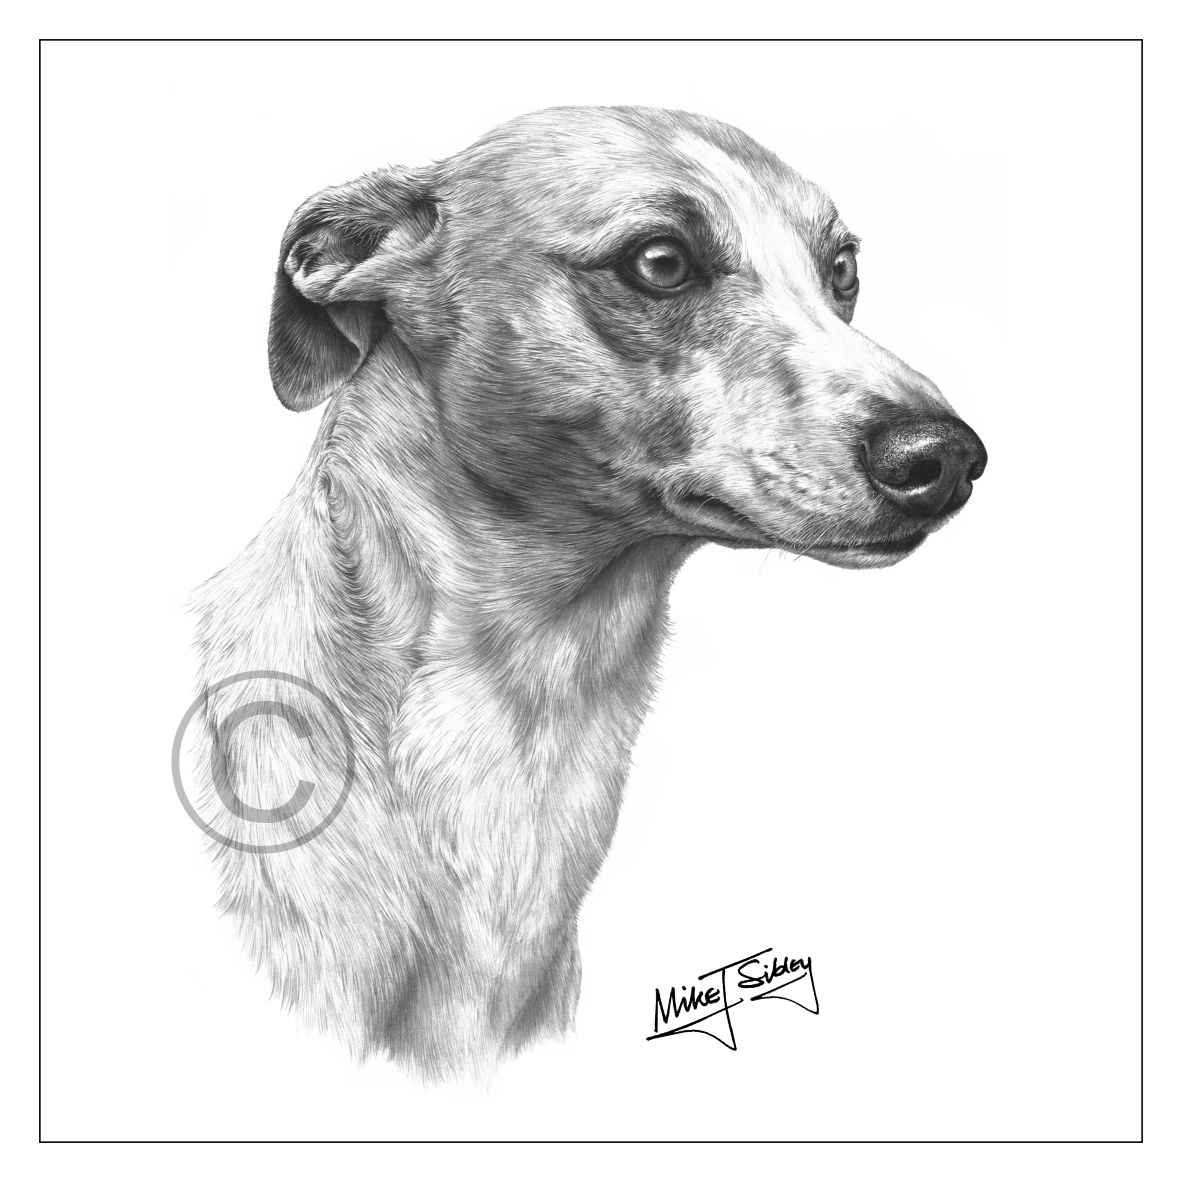 Mike Sibley Design Whippet Greeting Card